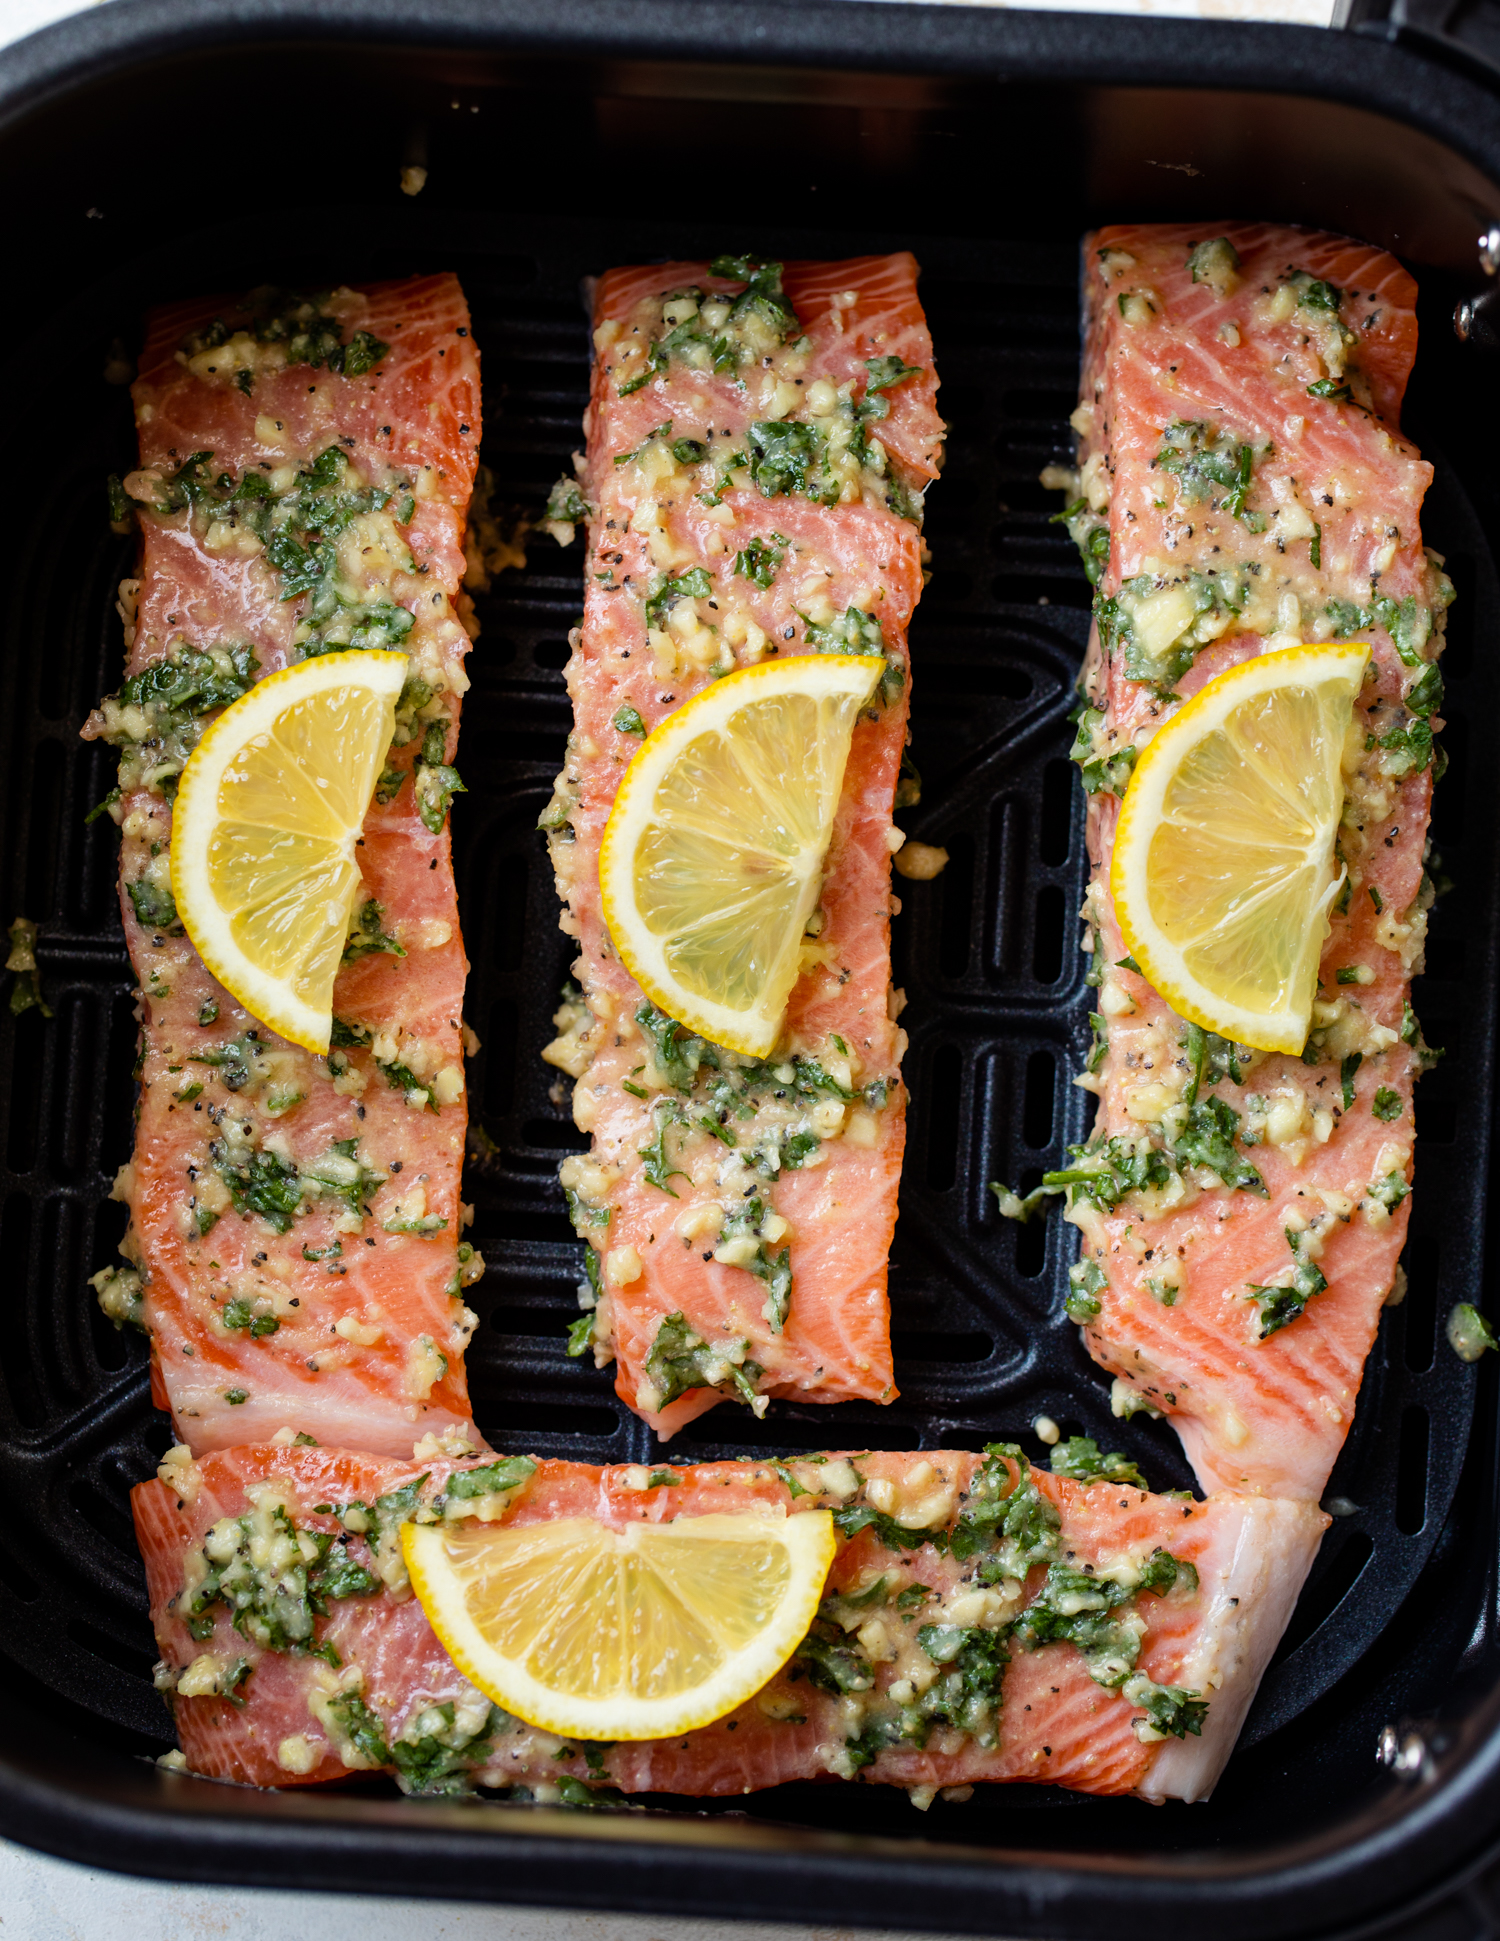 Salmon covered with lemon wedges in an air fryer.